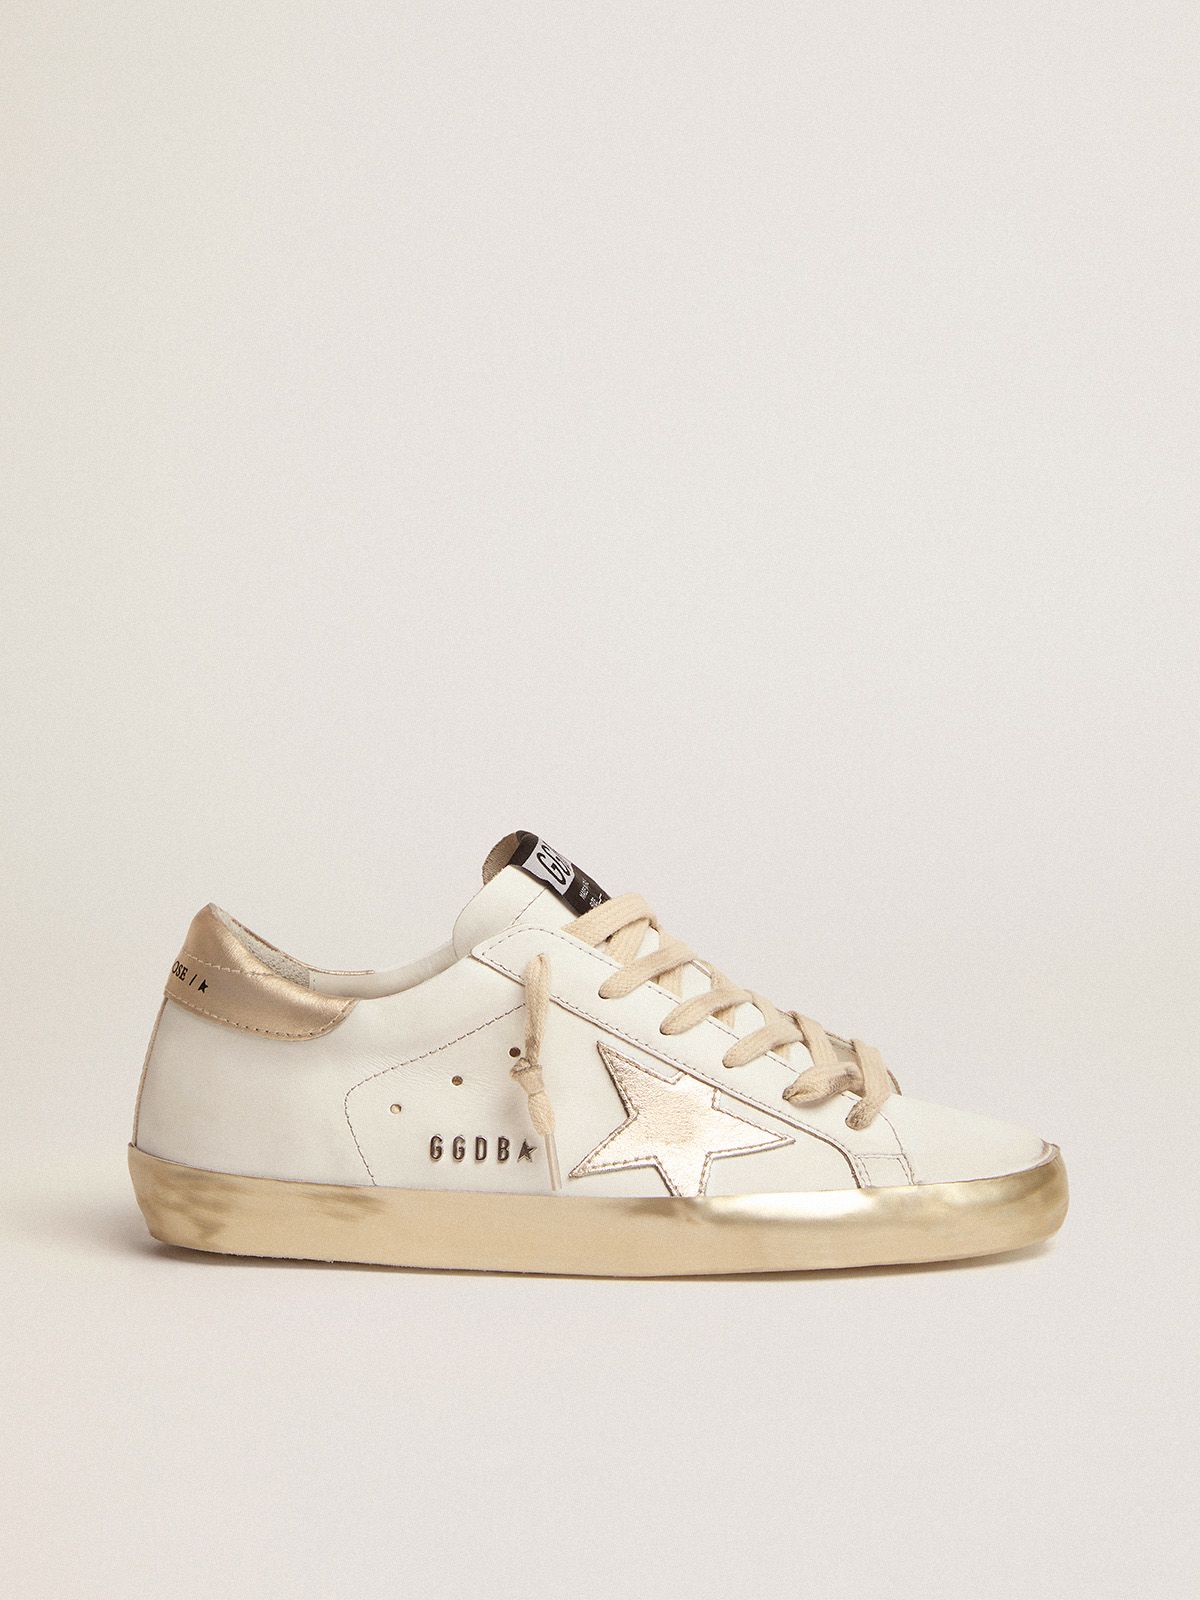 golden goose sneakers lettering Super-Star foxing gold metal and with stud sparkle